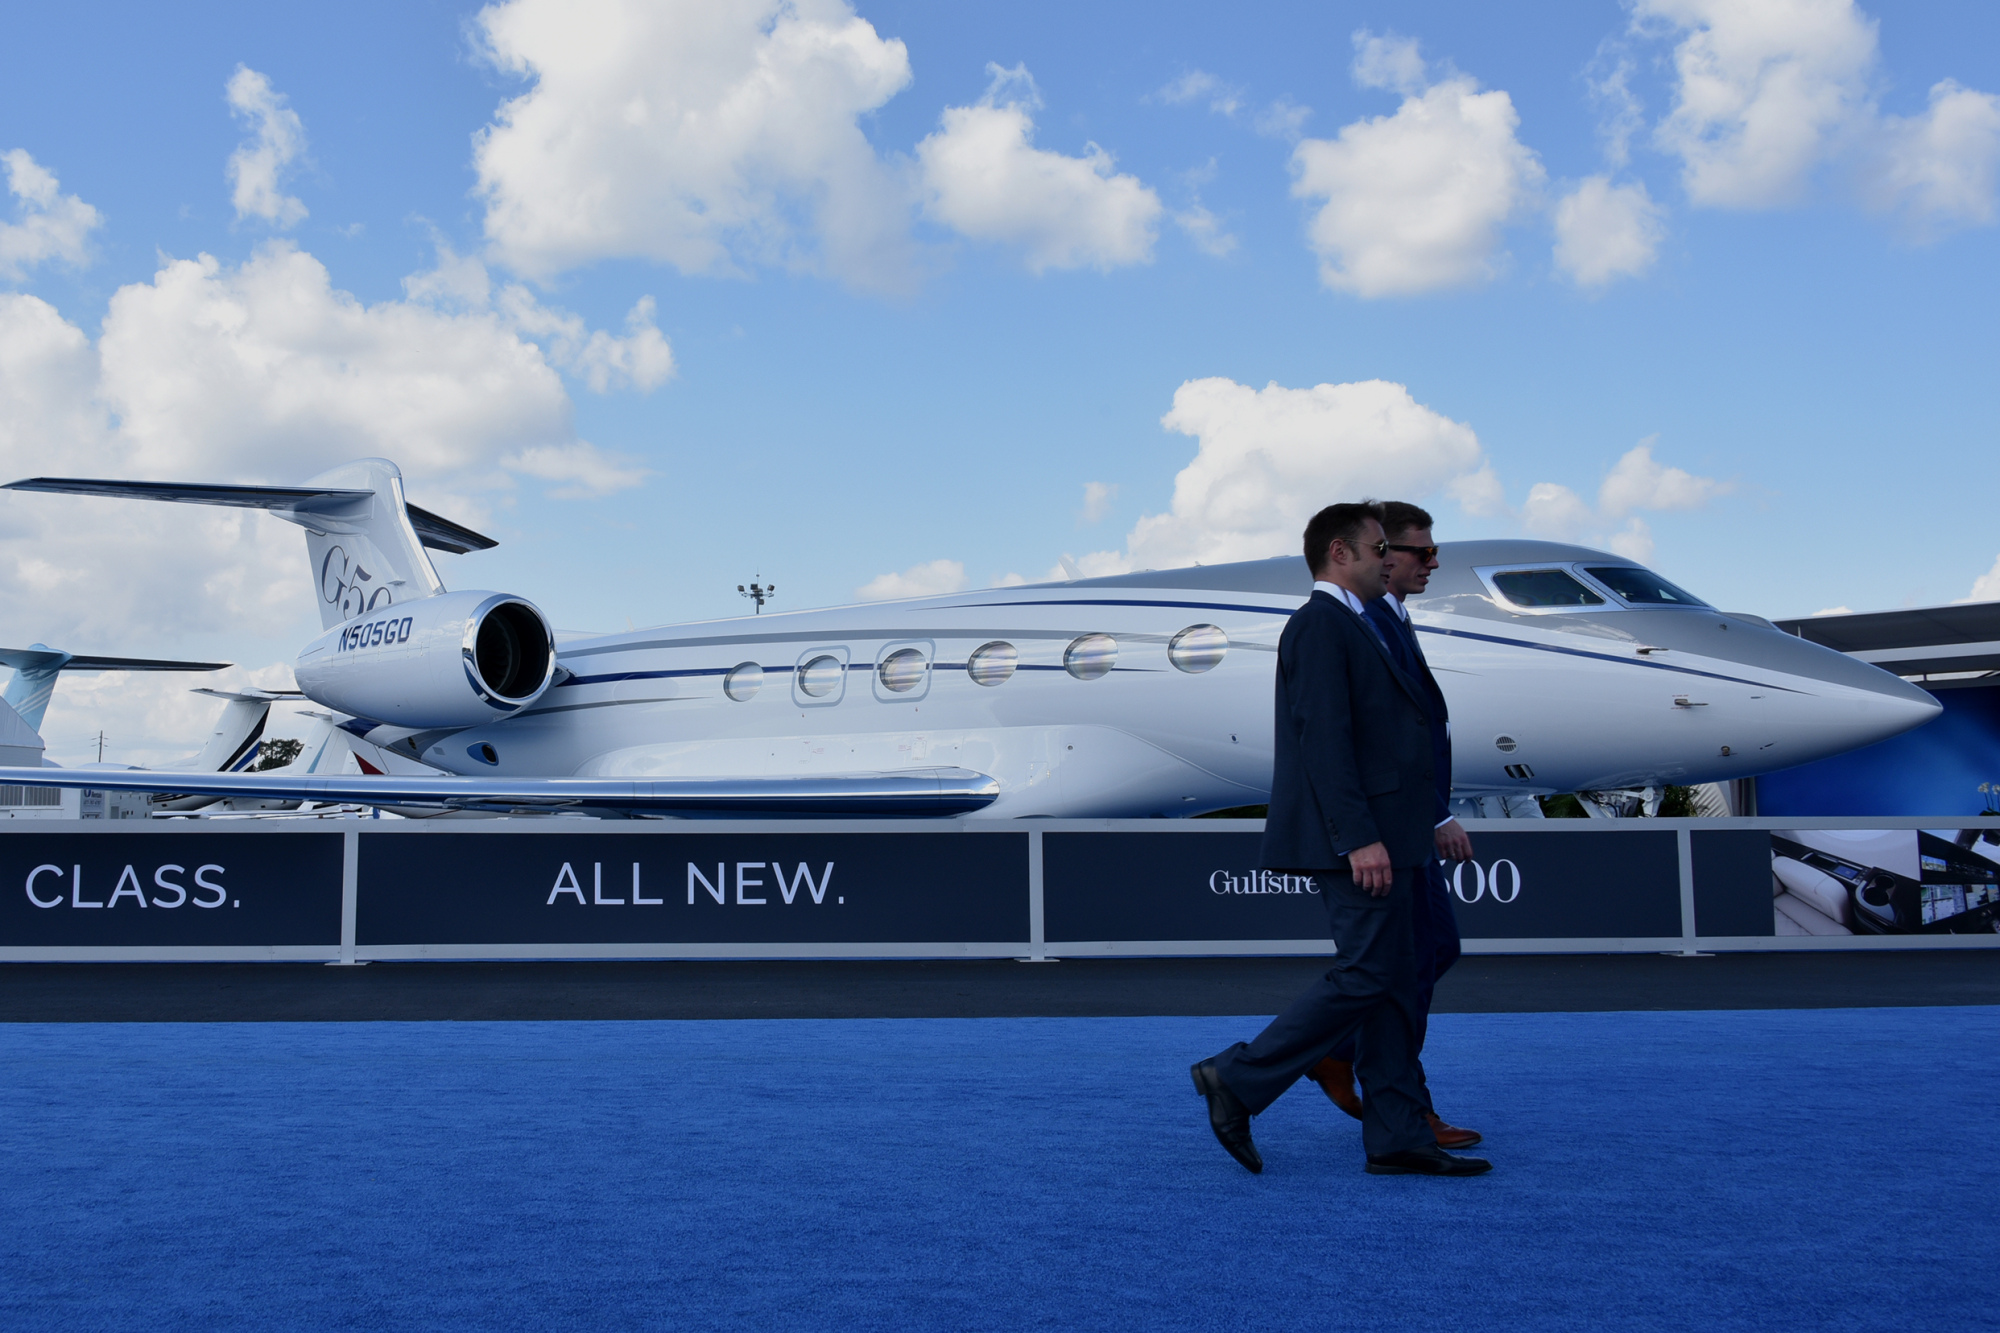 Bahamas, Ibiza, Bali: Where the wealthy go in their private jets